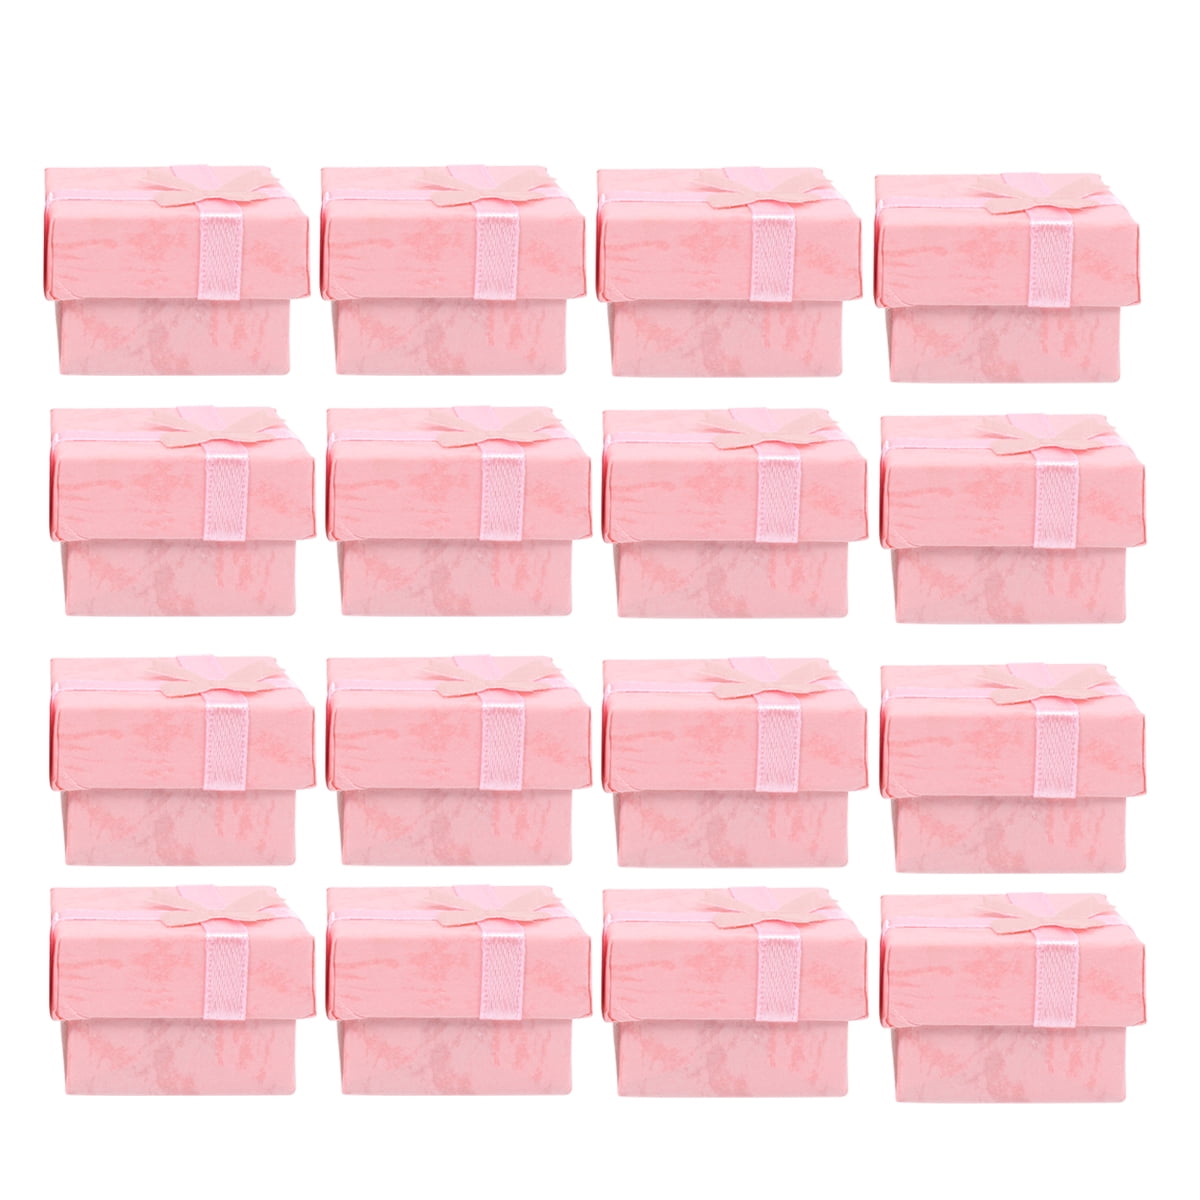 24pcs Cube Ring Earrings Jewelry Gift Box for Weddings Birthdays Assorted Colors 